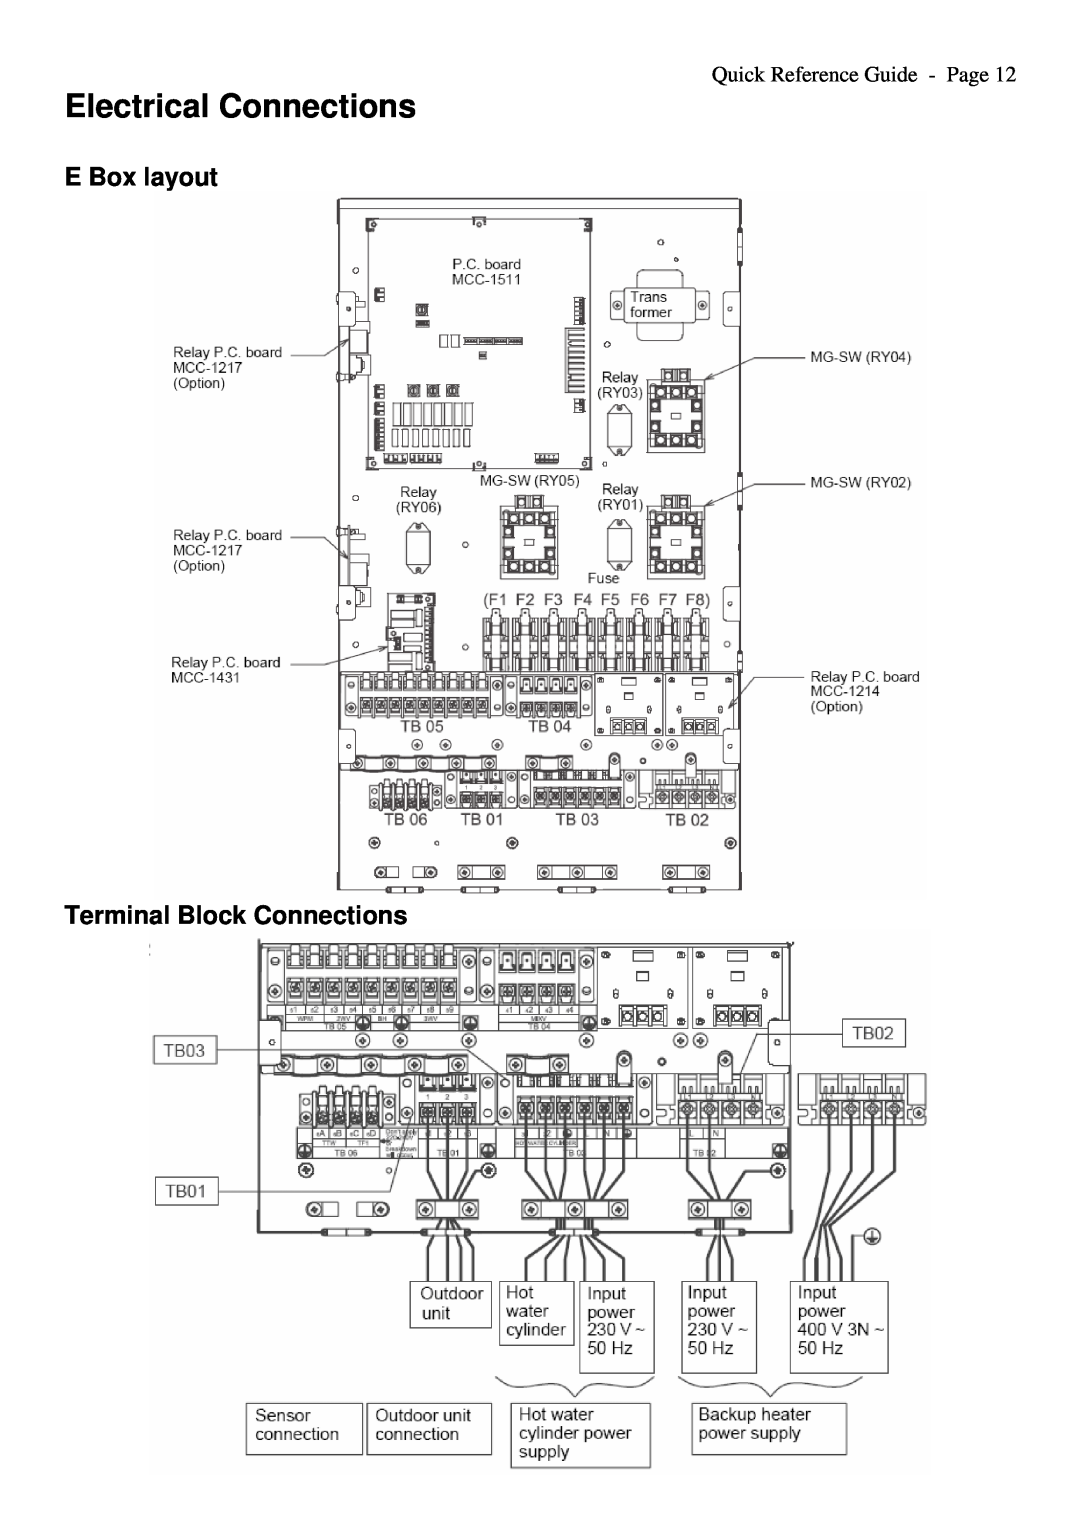 Toshiba A09-01P manual Electrical Connections, E Box layout Terminal Block Connections, Quick Reference Guide - Page 